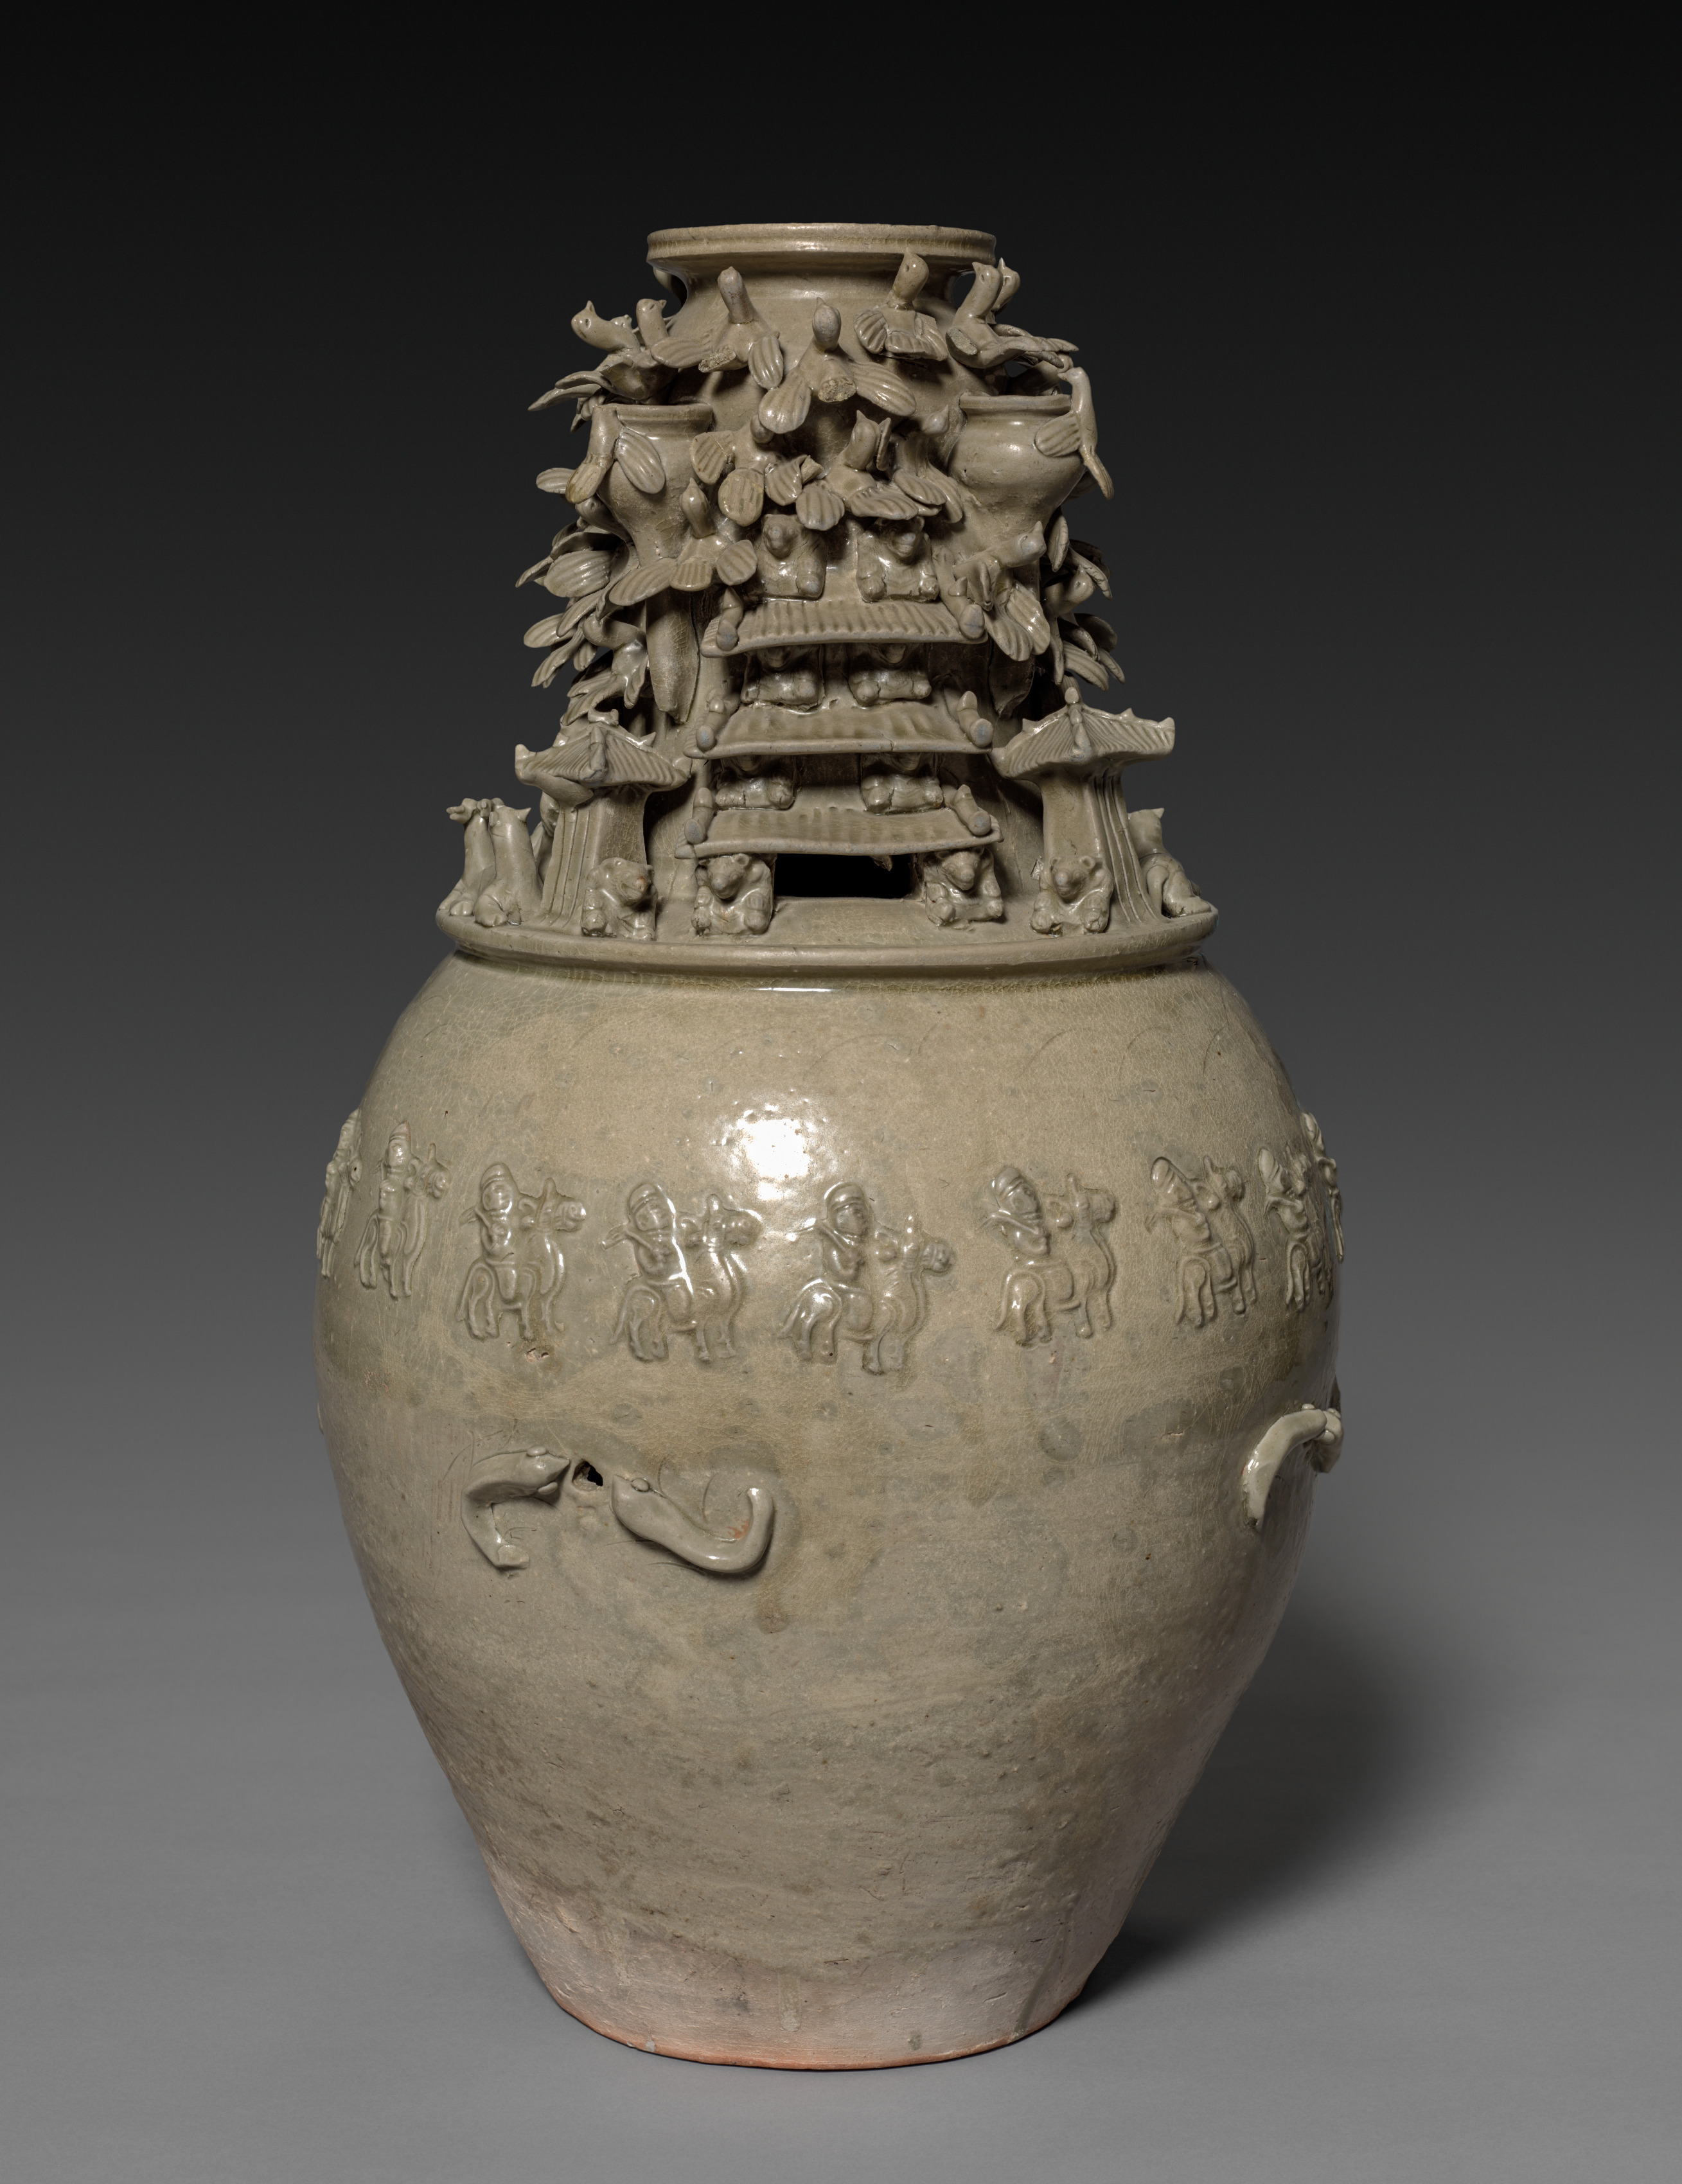 Funerary Urn (Hunping) with Figures, Pavilions, and Birds